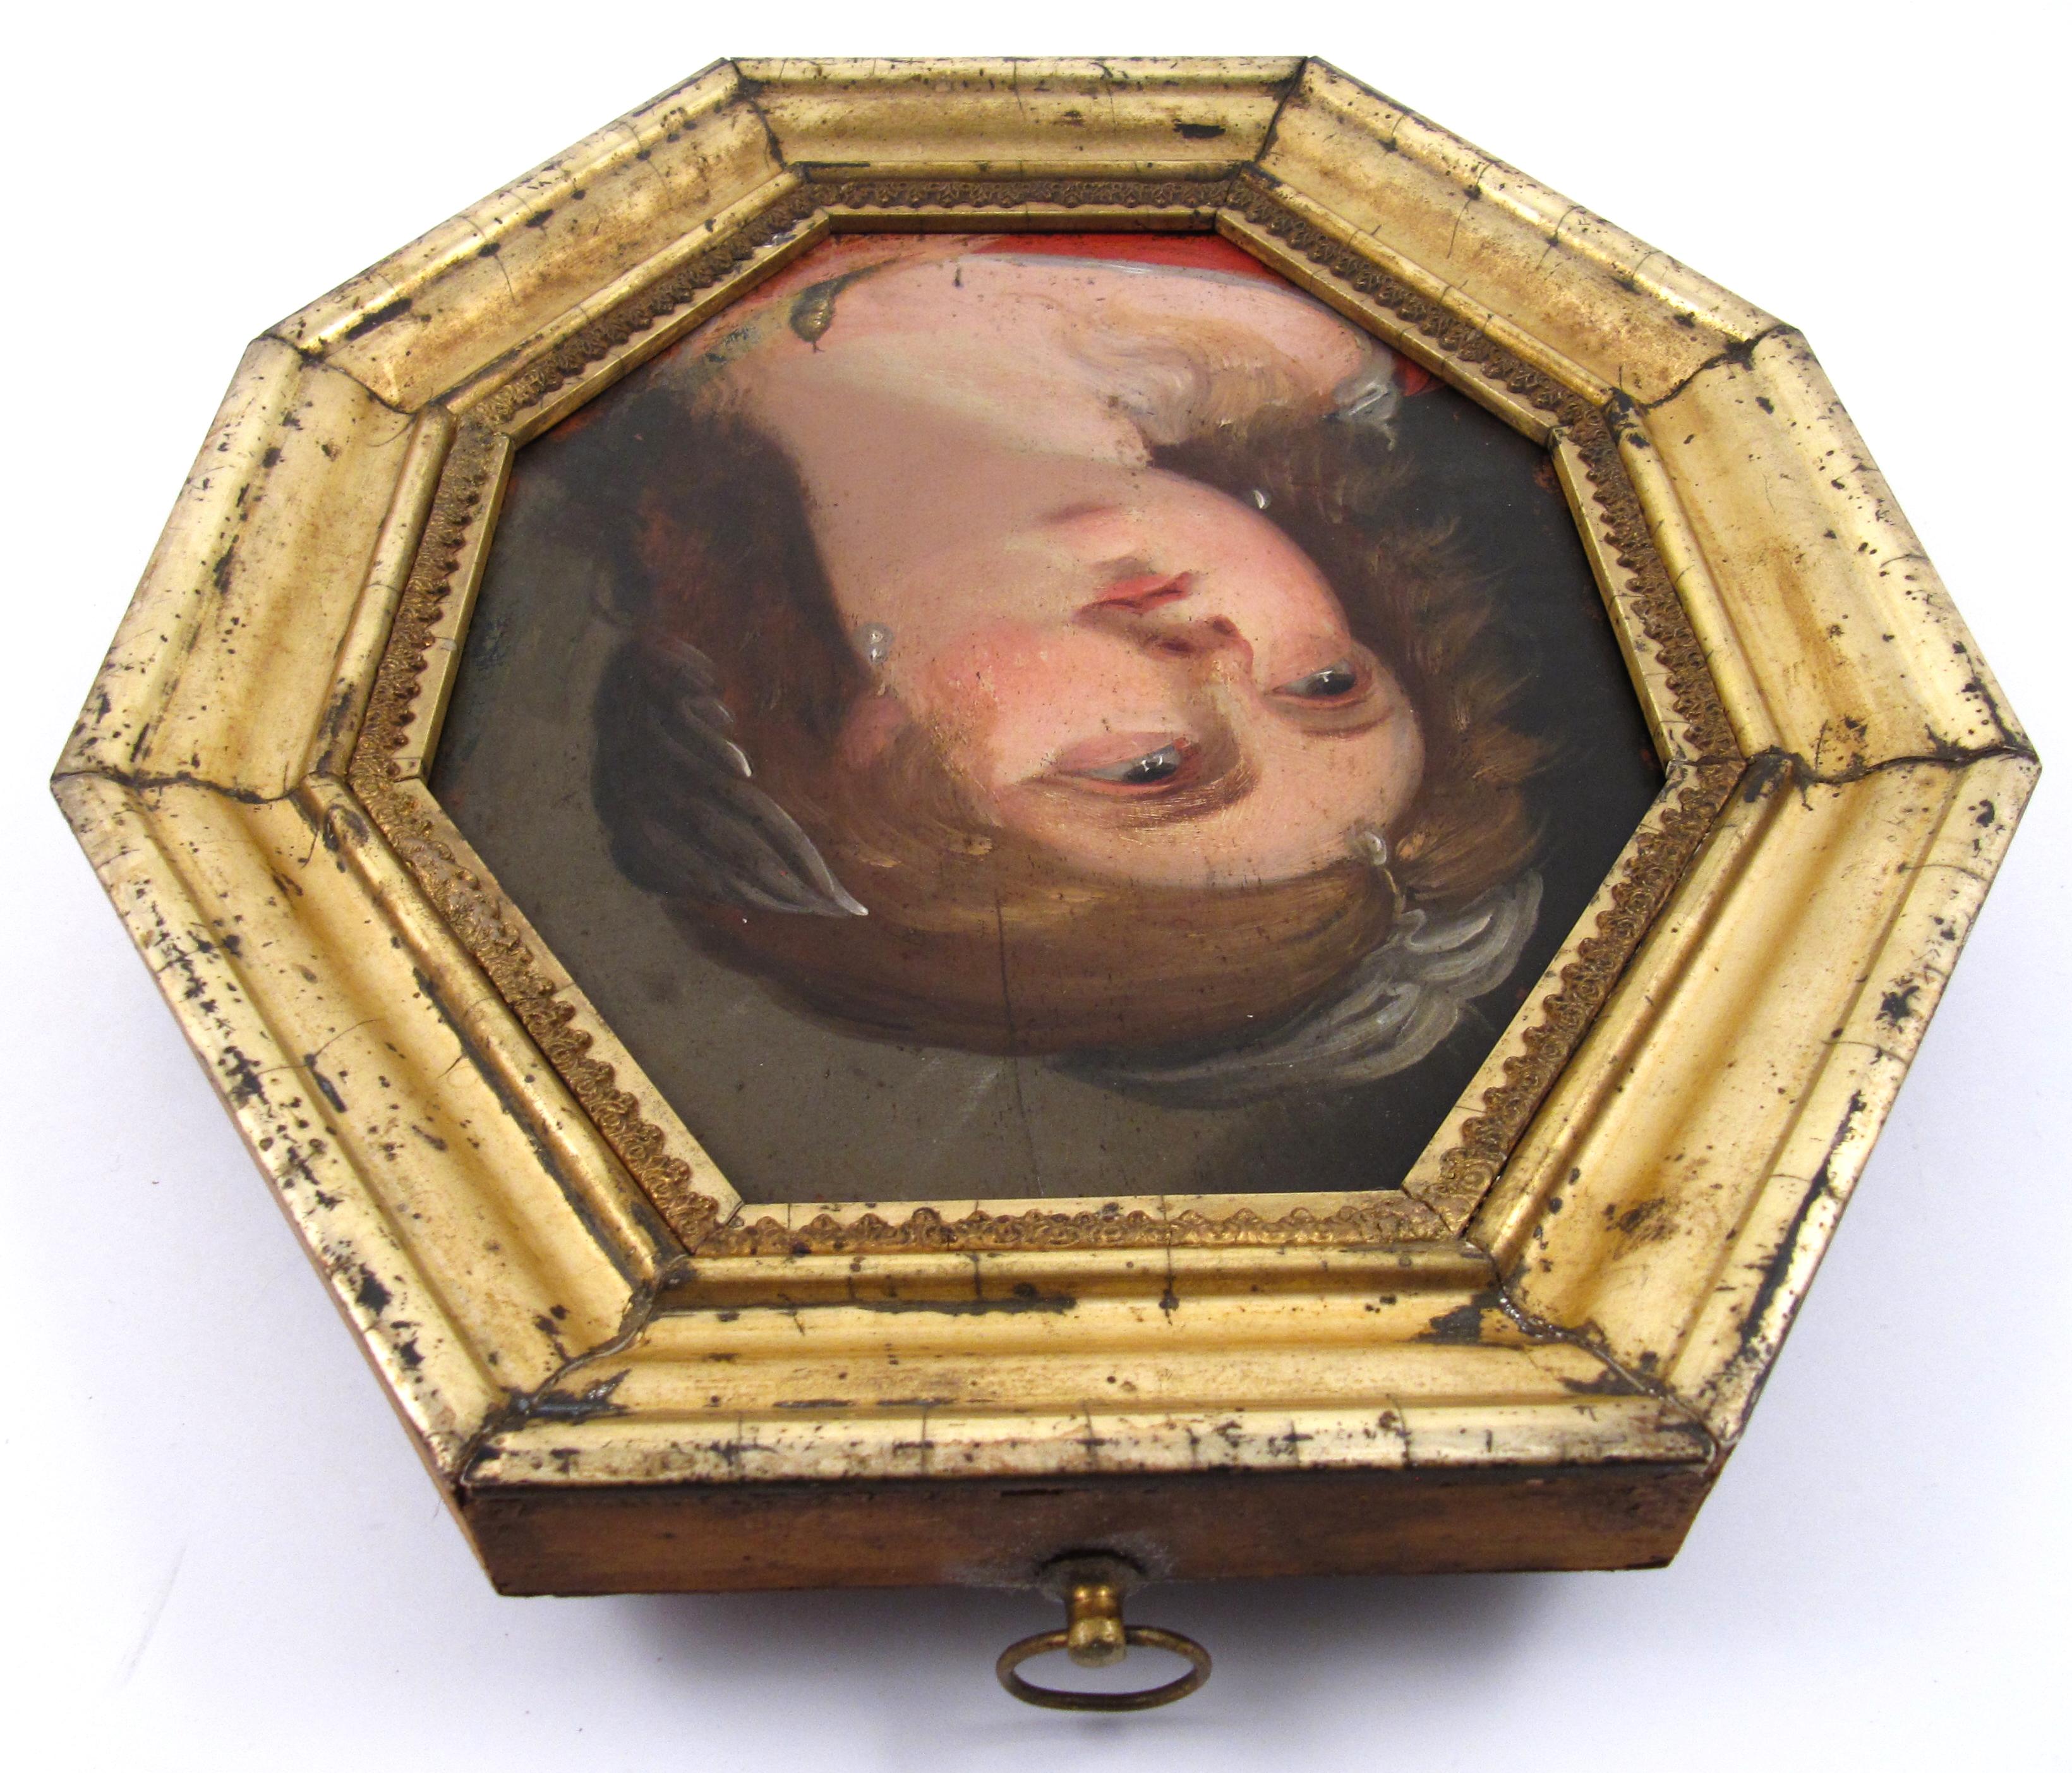 Italian School
By a follower of Guido Reni (1575-1642)

The Death of Cleopatra

•	17th Century
•	Oil on octagonal hewn oak panel, ca. 25 x 19 cm
•	Octagonal frame, constructed out of a 19th Century gilt frame, ca. 32.5 x 27 cm

Worldwide shipping is